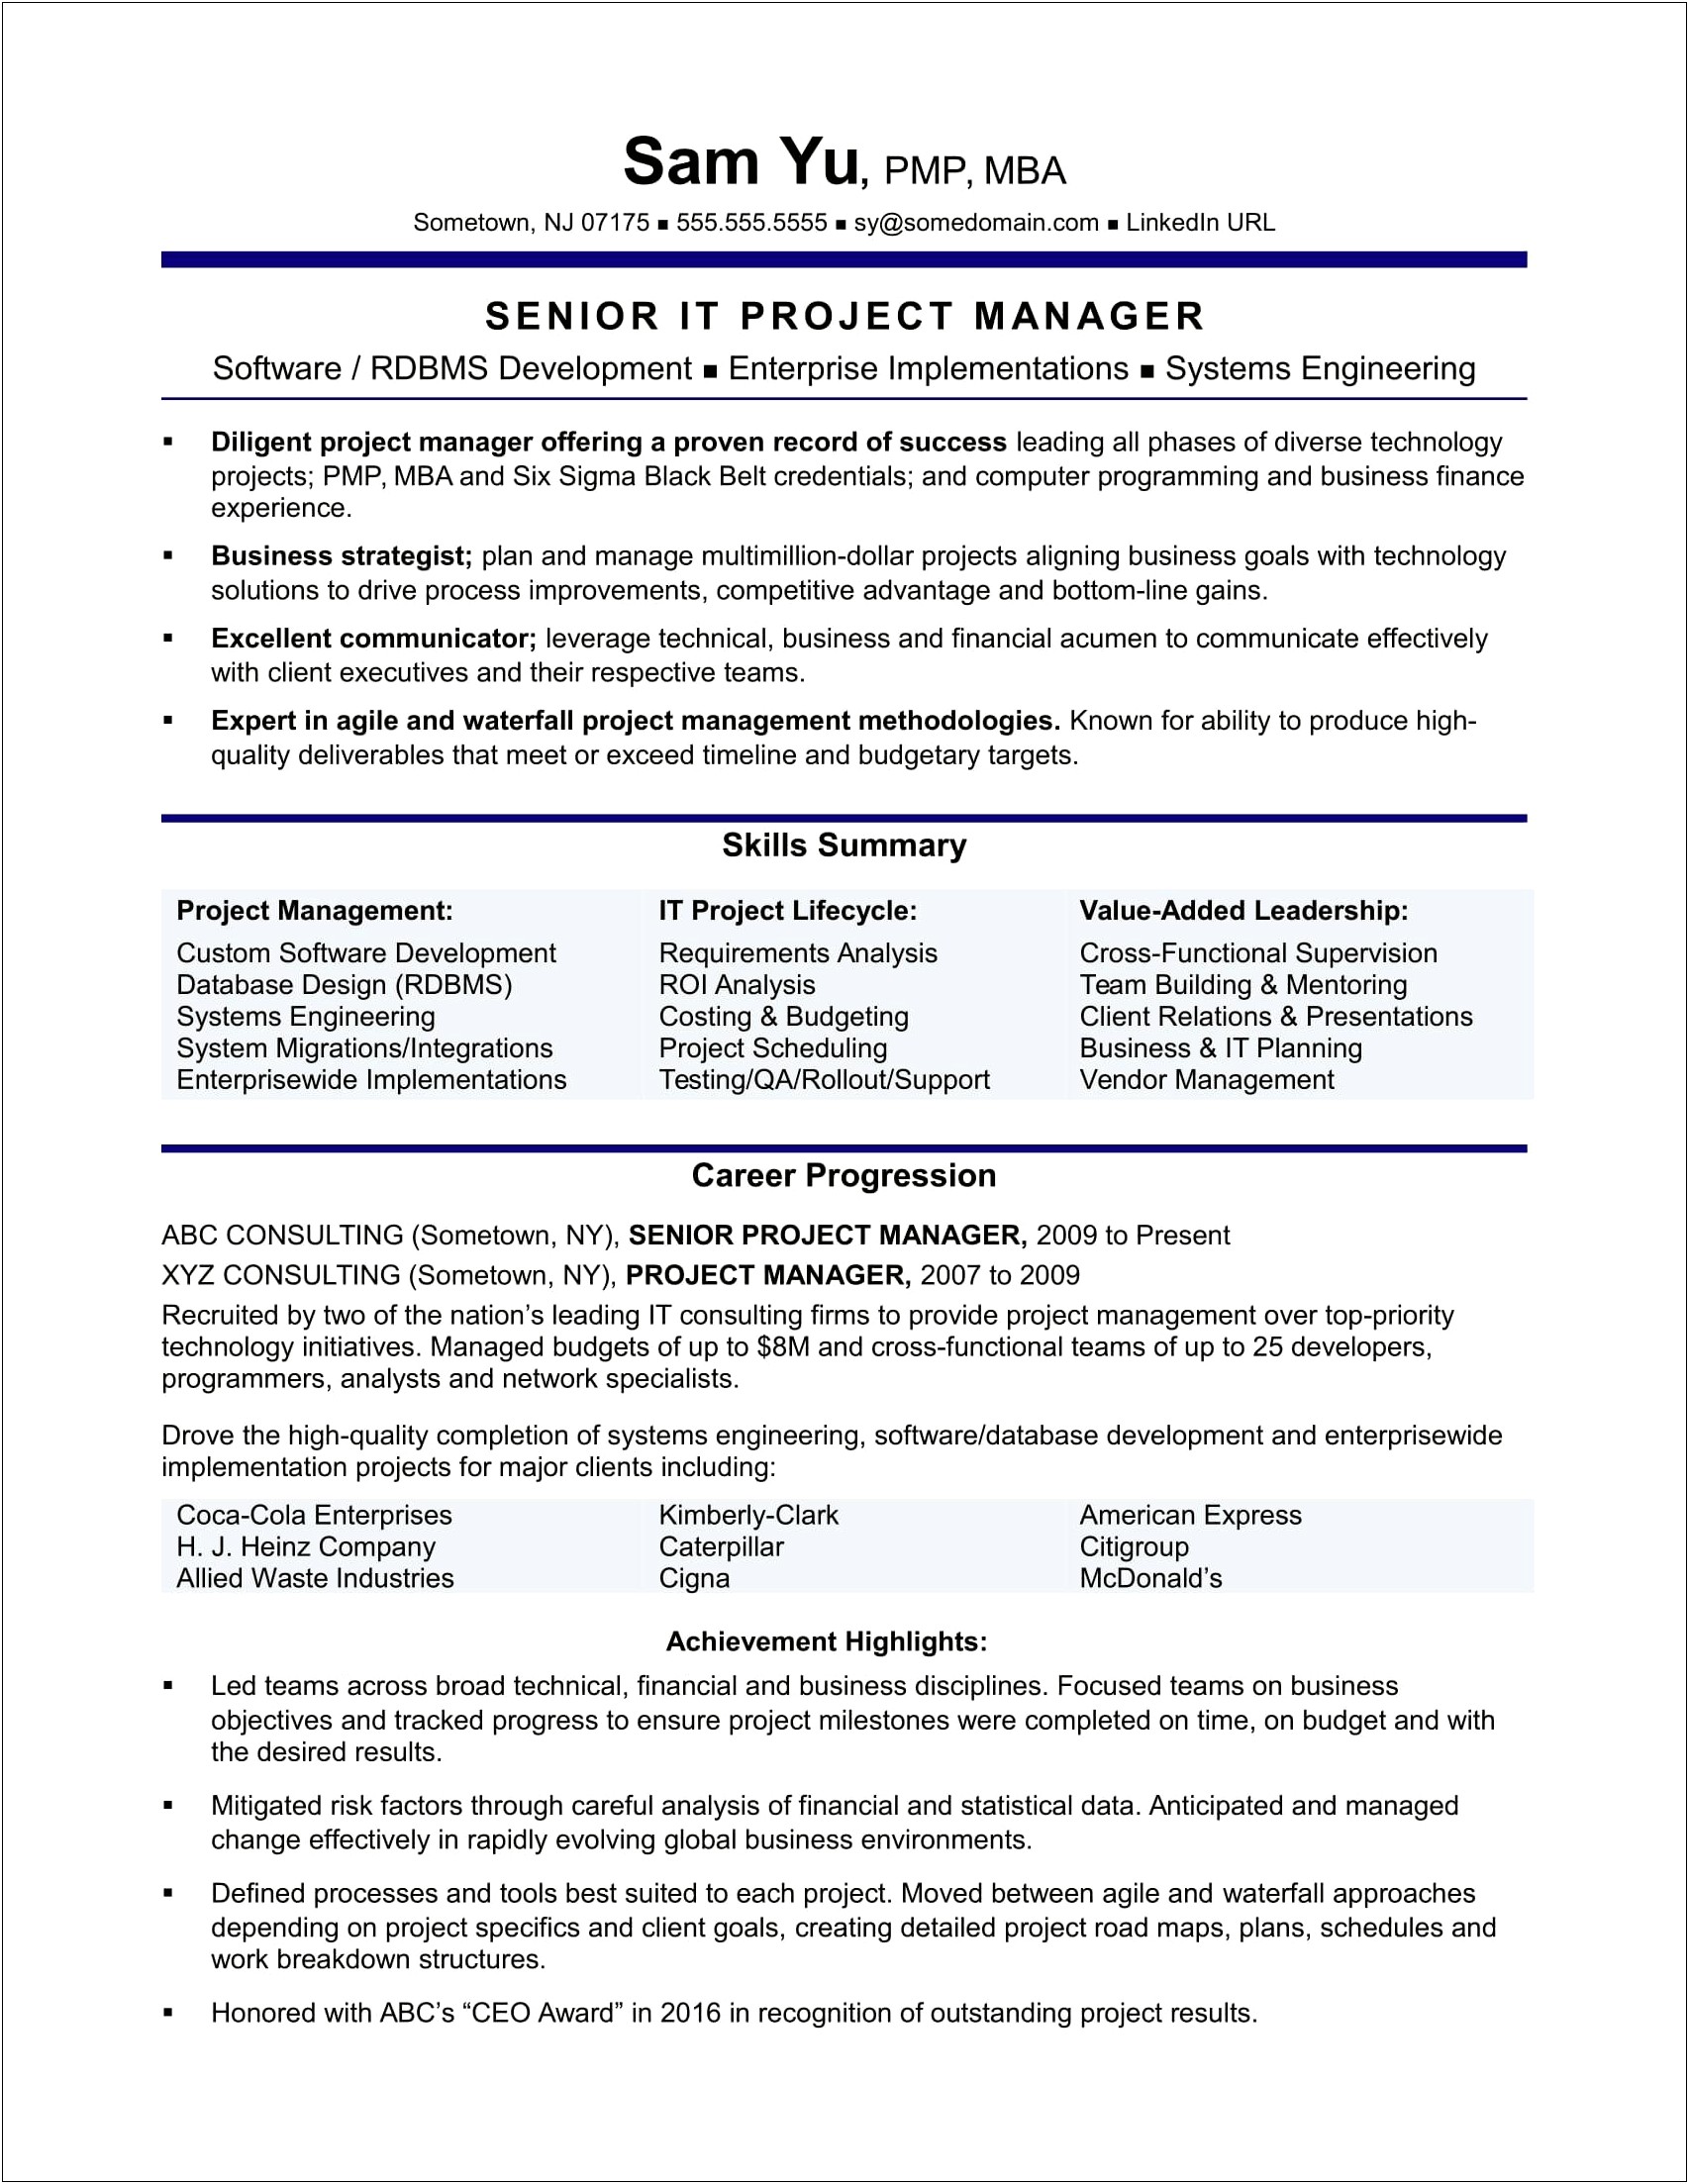 Resume Summary For Process Manager